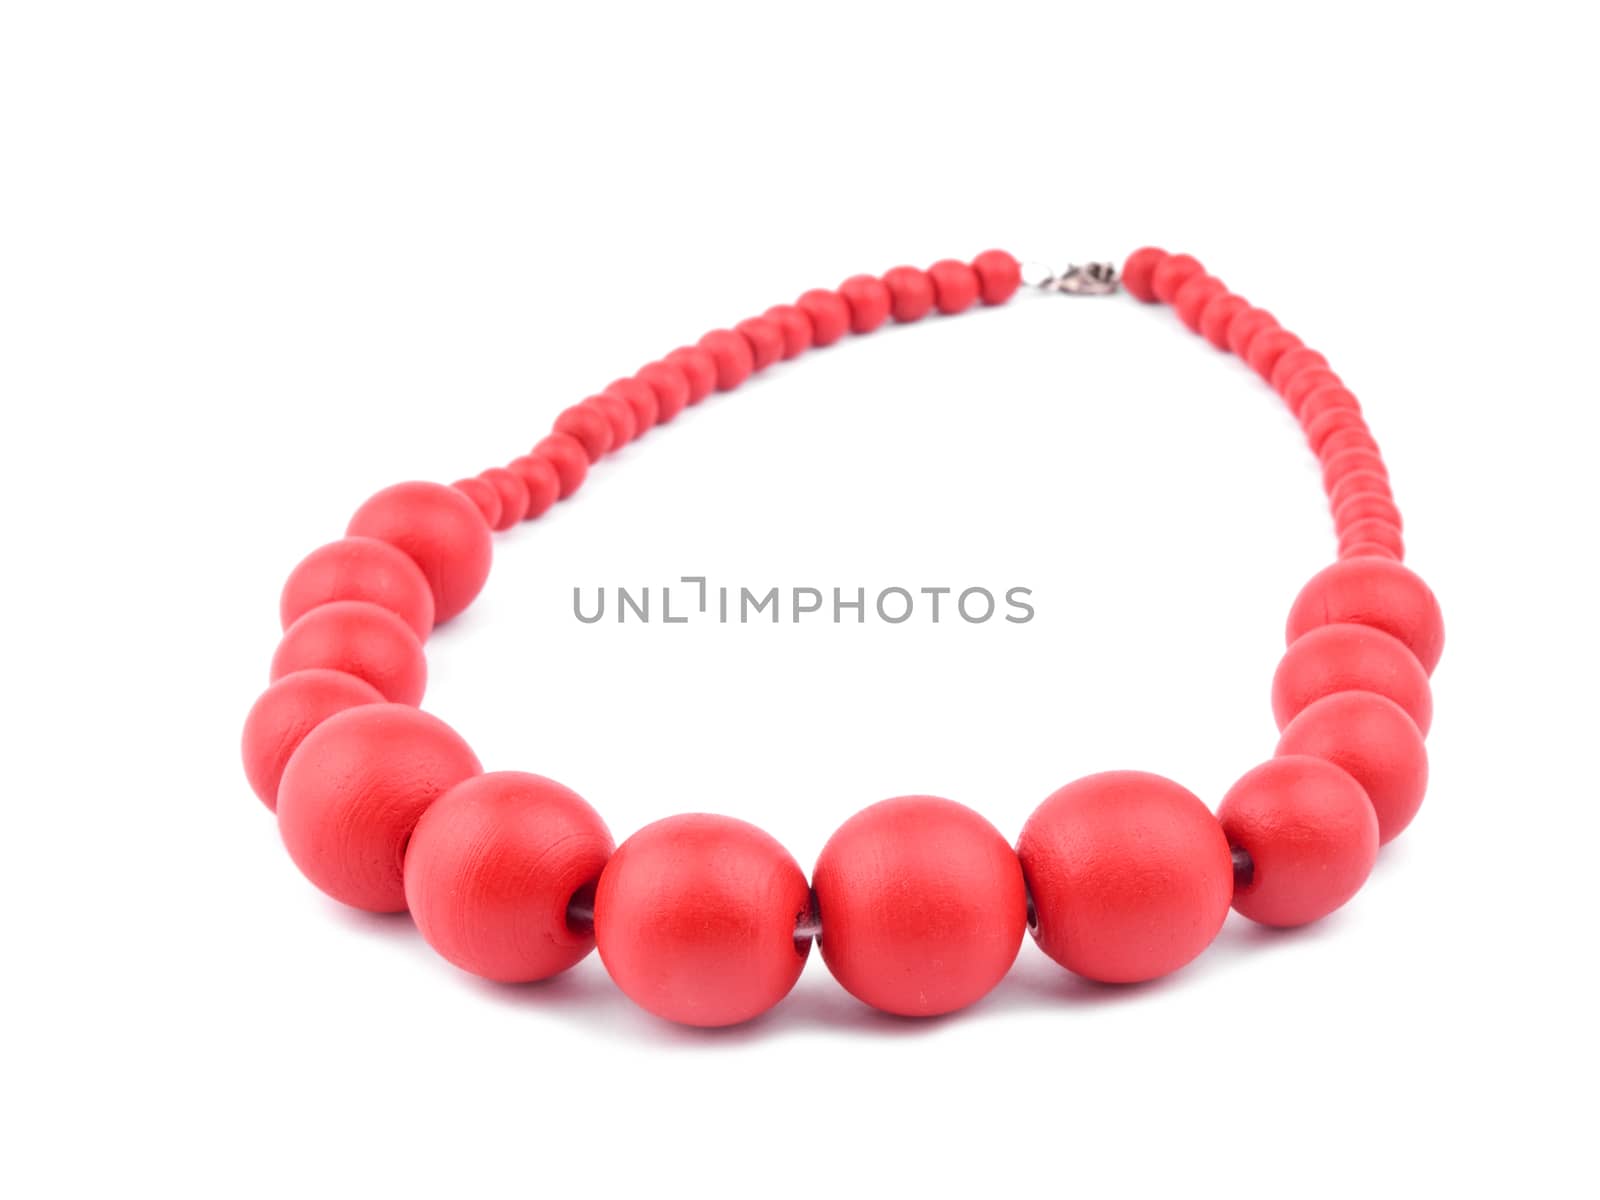 Necklace made from red wooden beads on white background